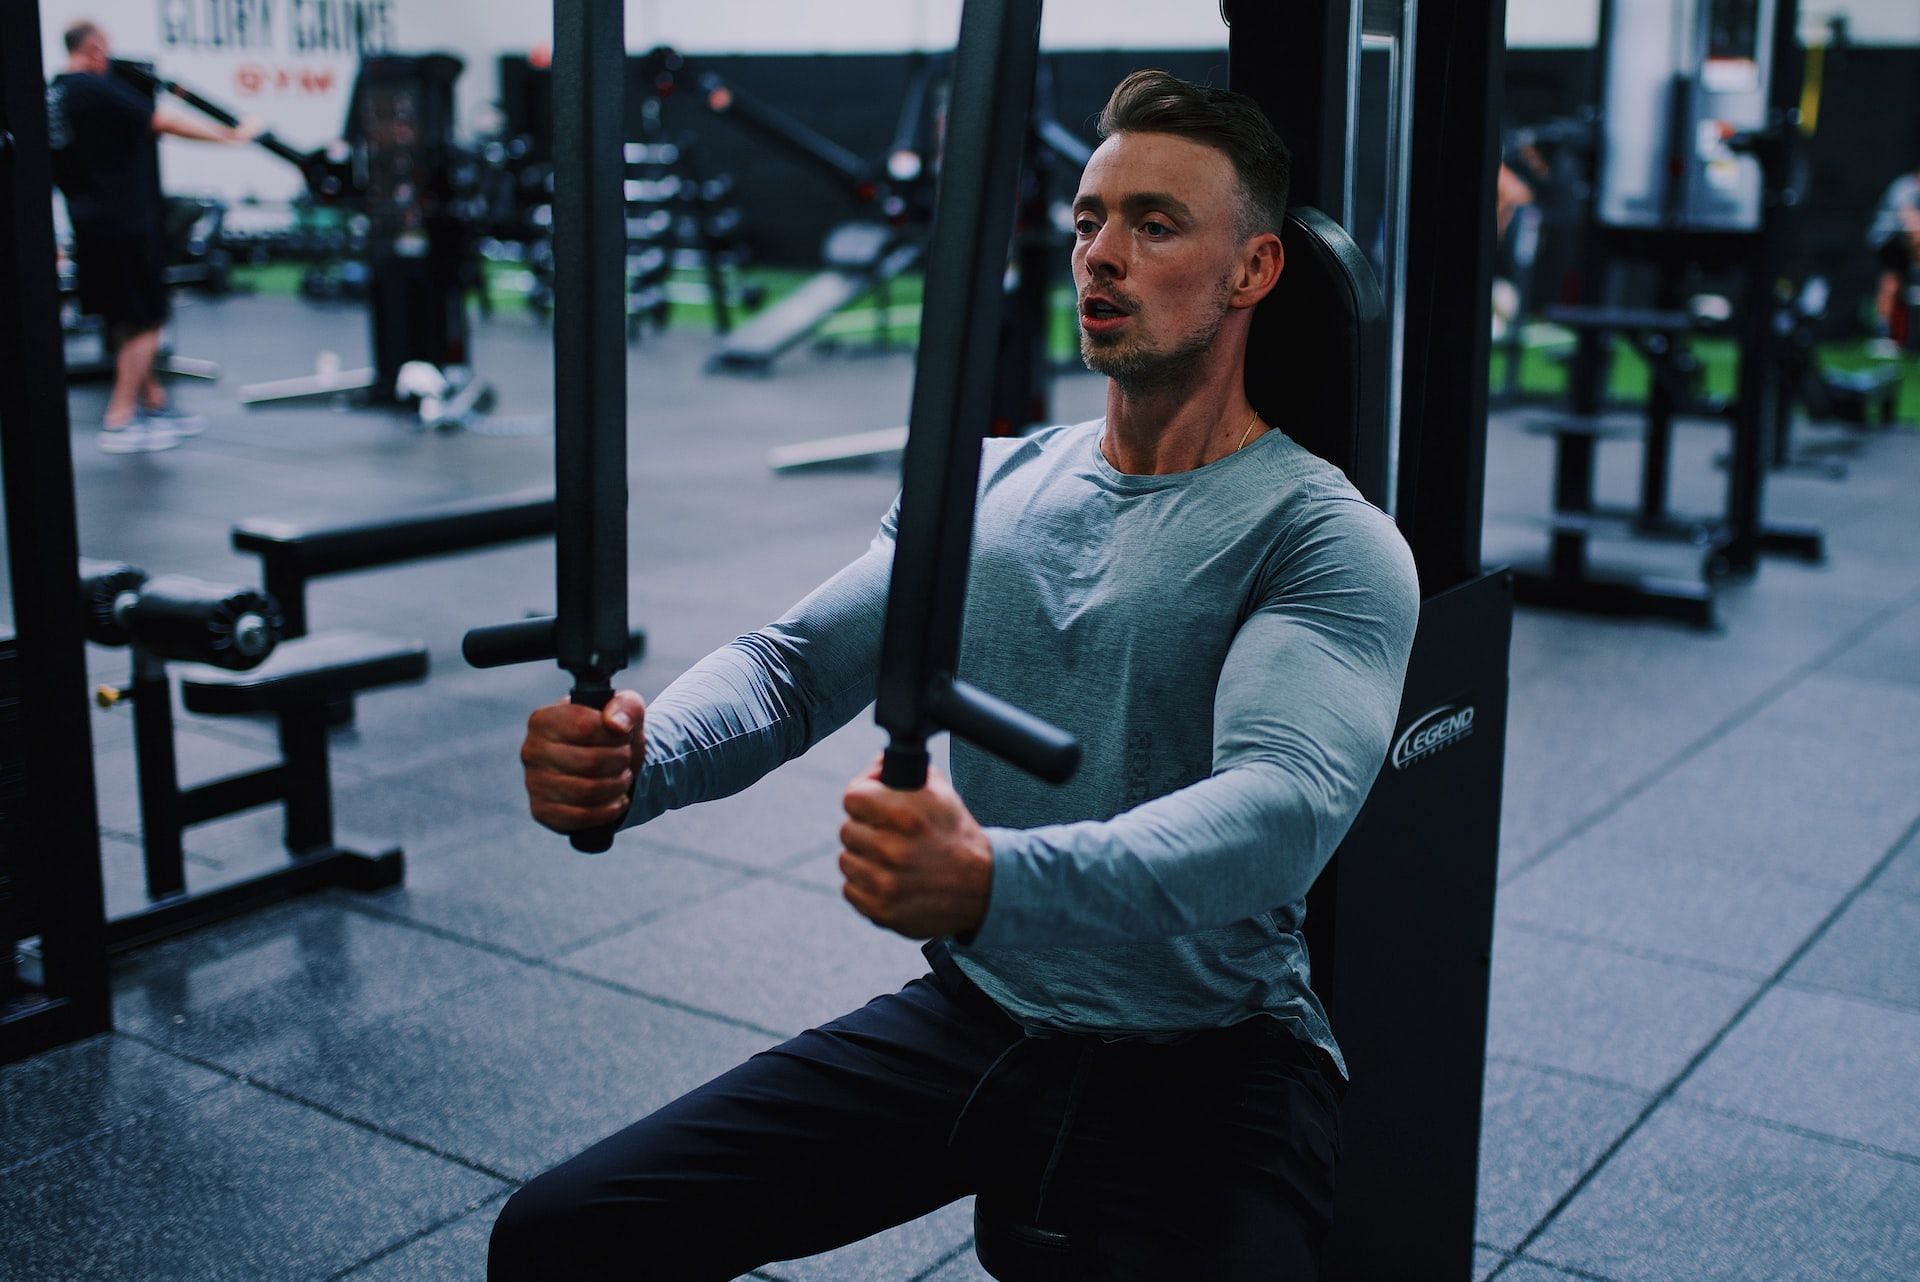 Chest and tricep workouts for upper body (Photo by Gordon Cowie on Unsplash)